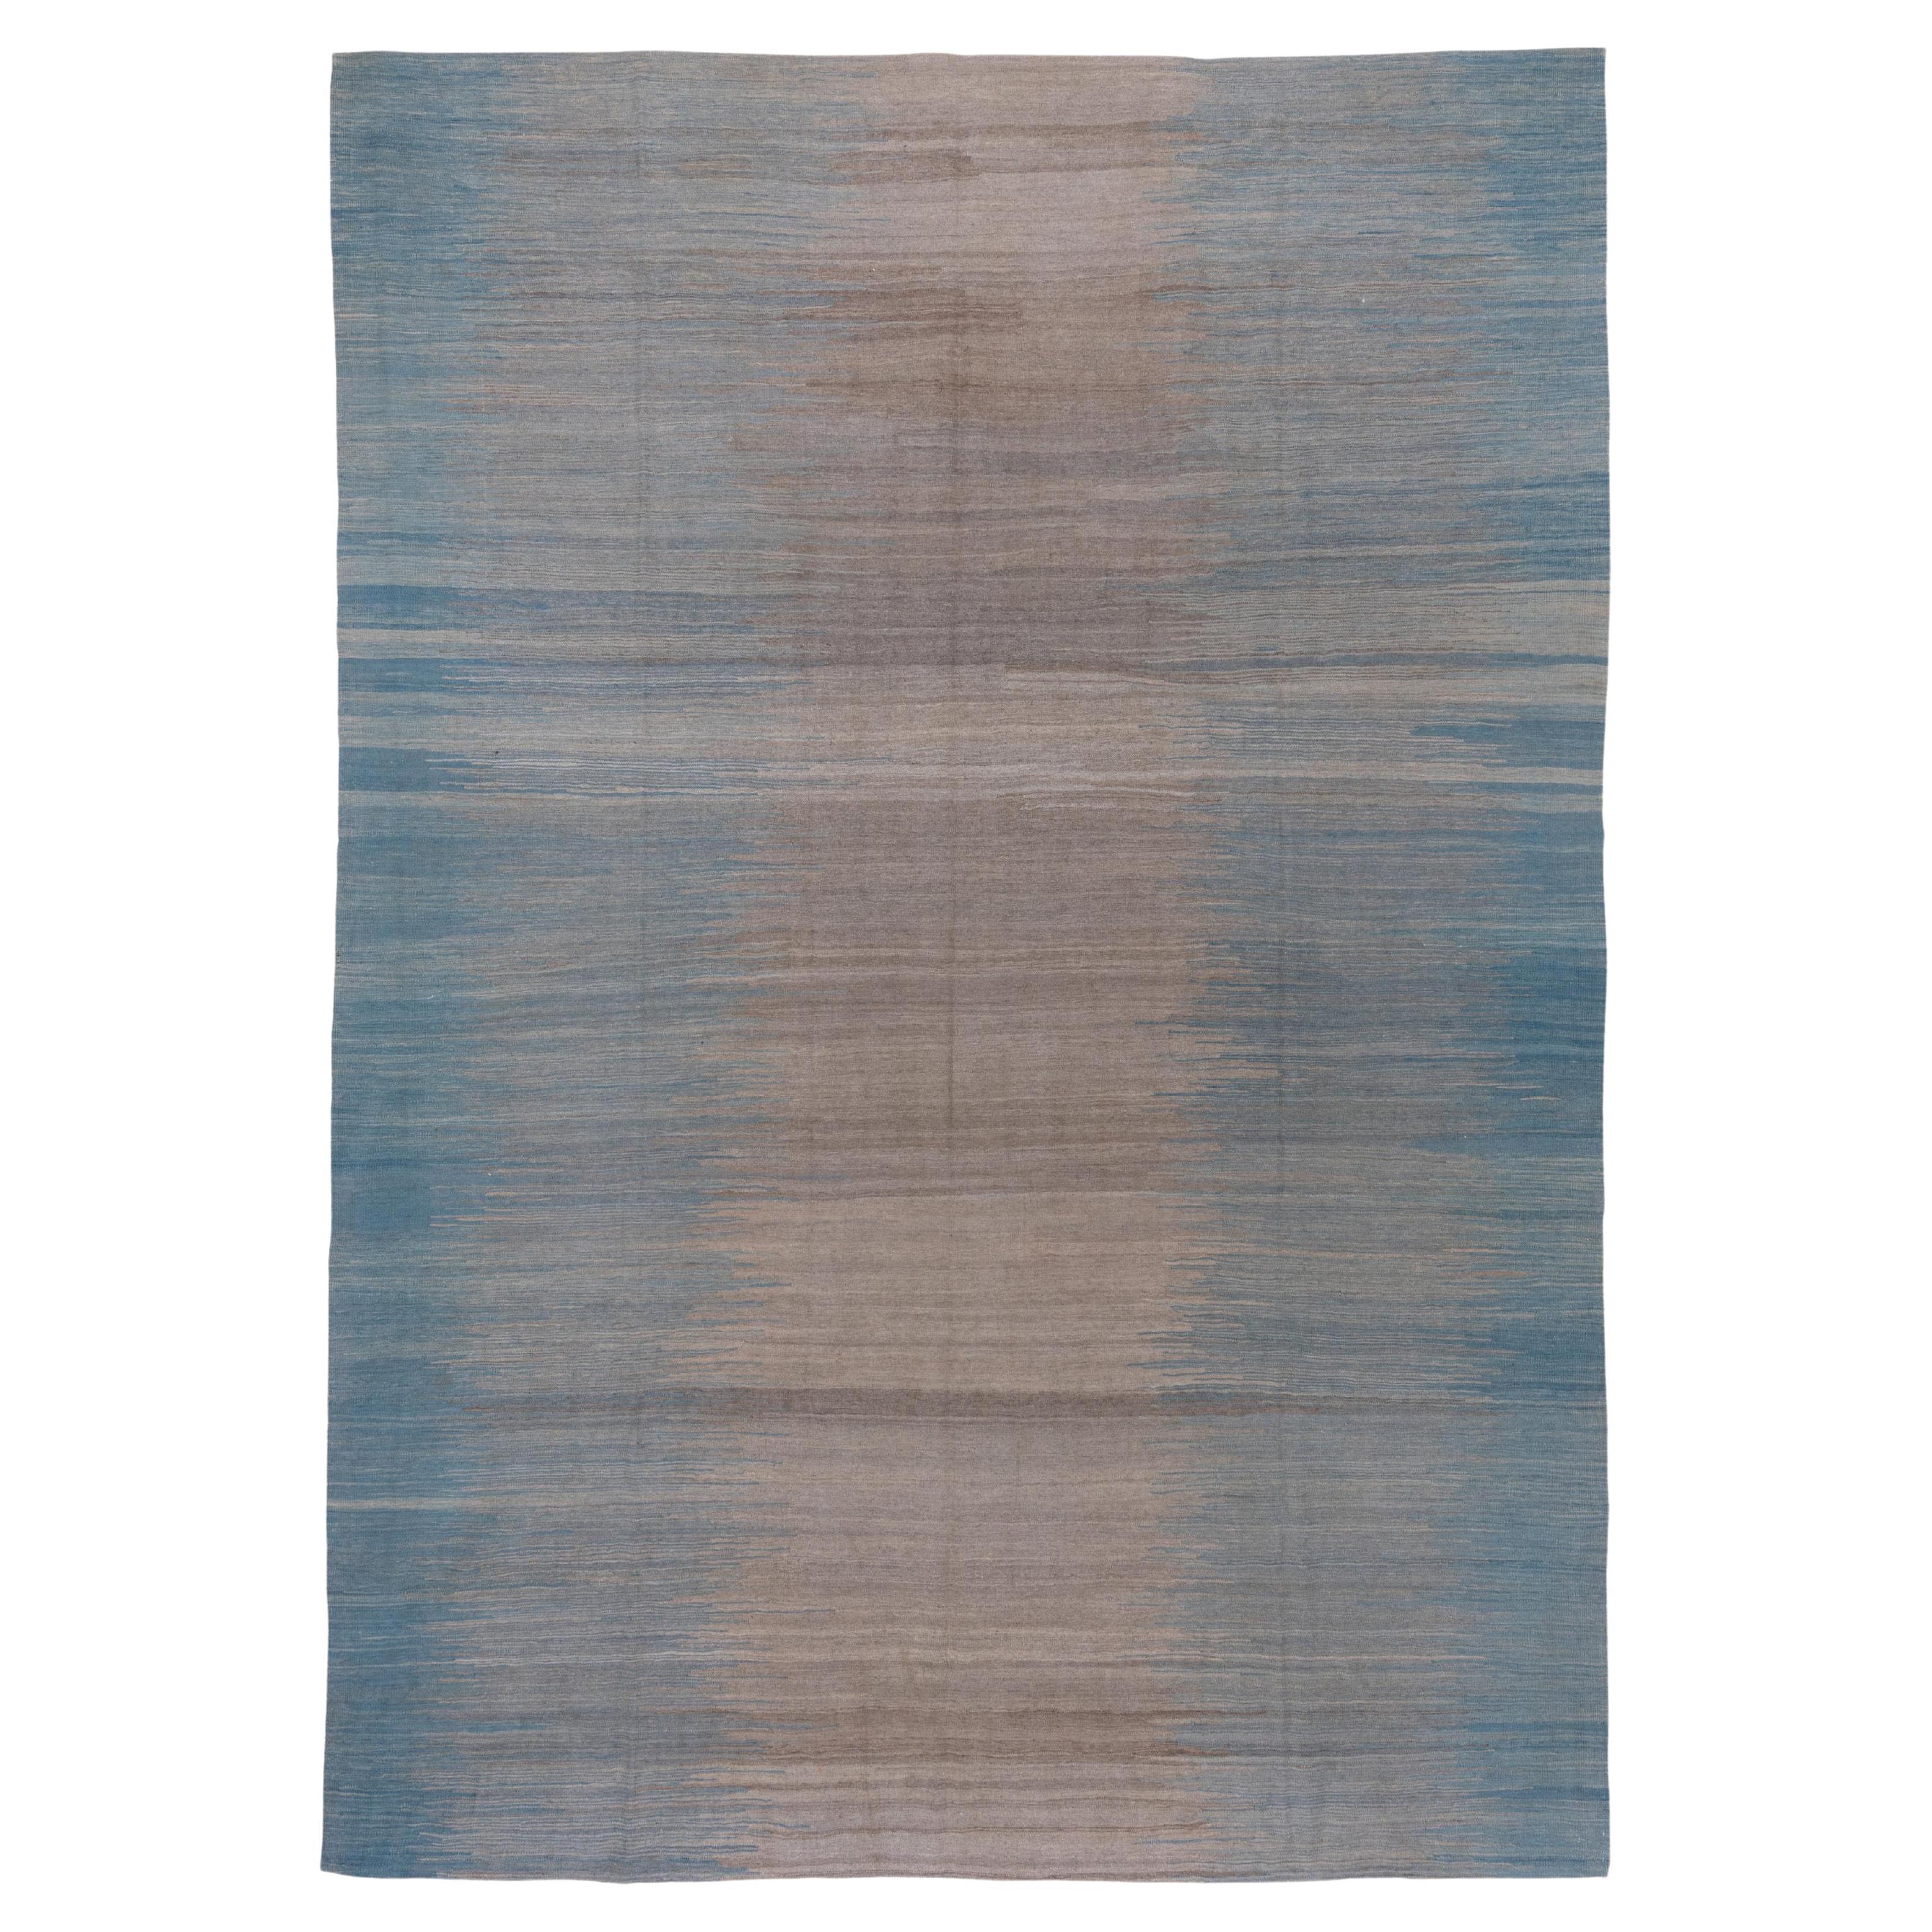 Modern & Contemporary Handwoven Flatweave Rug, Light Blue & Brown & Gray Palette For Sale